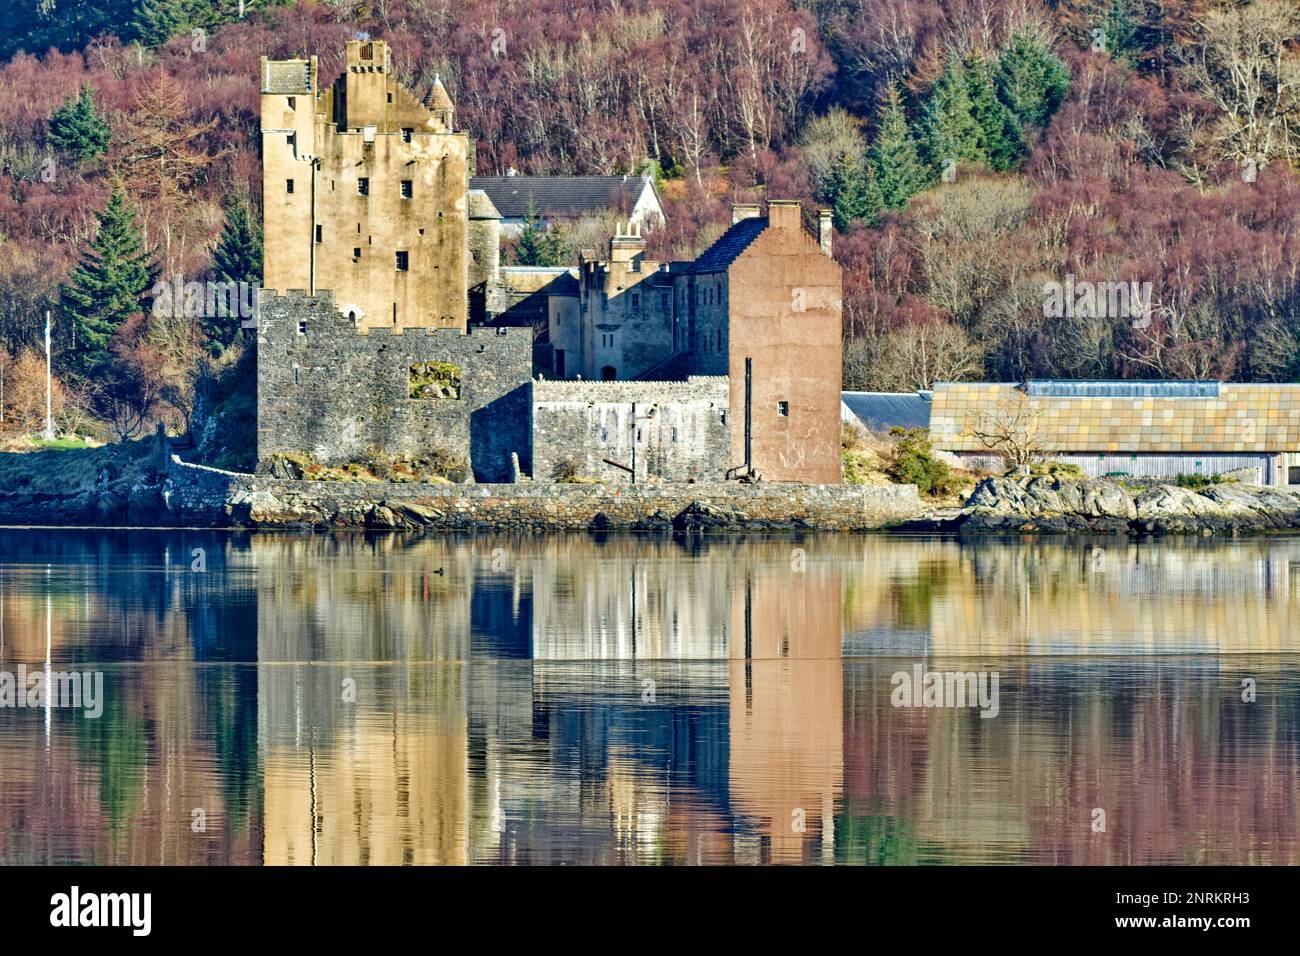 Eilean Donan Castle Loch Duich Scotland colours of the castle and birch trees reflected in the sea loch Stock Photo